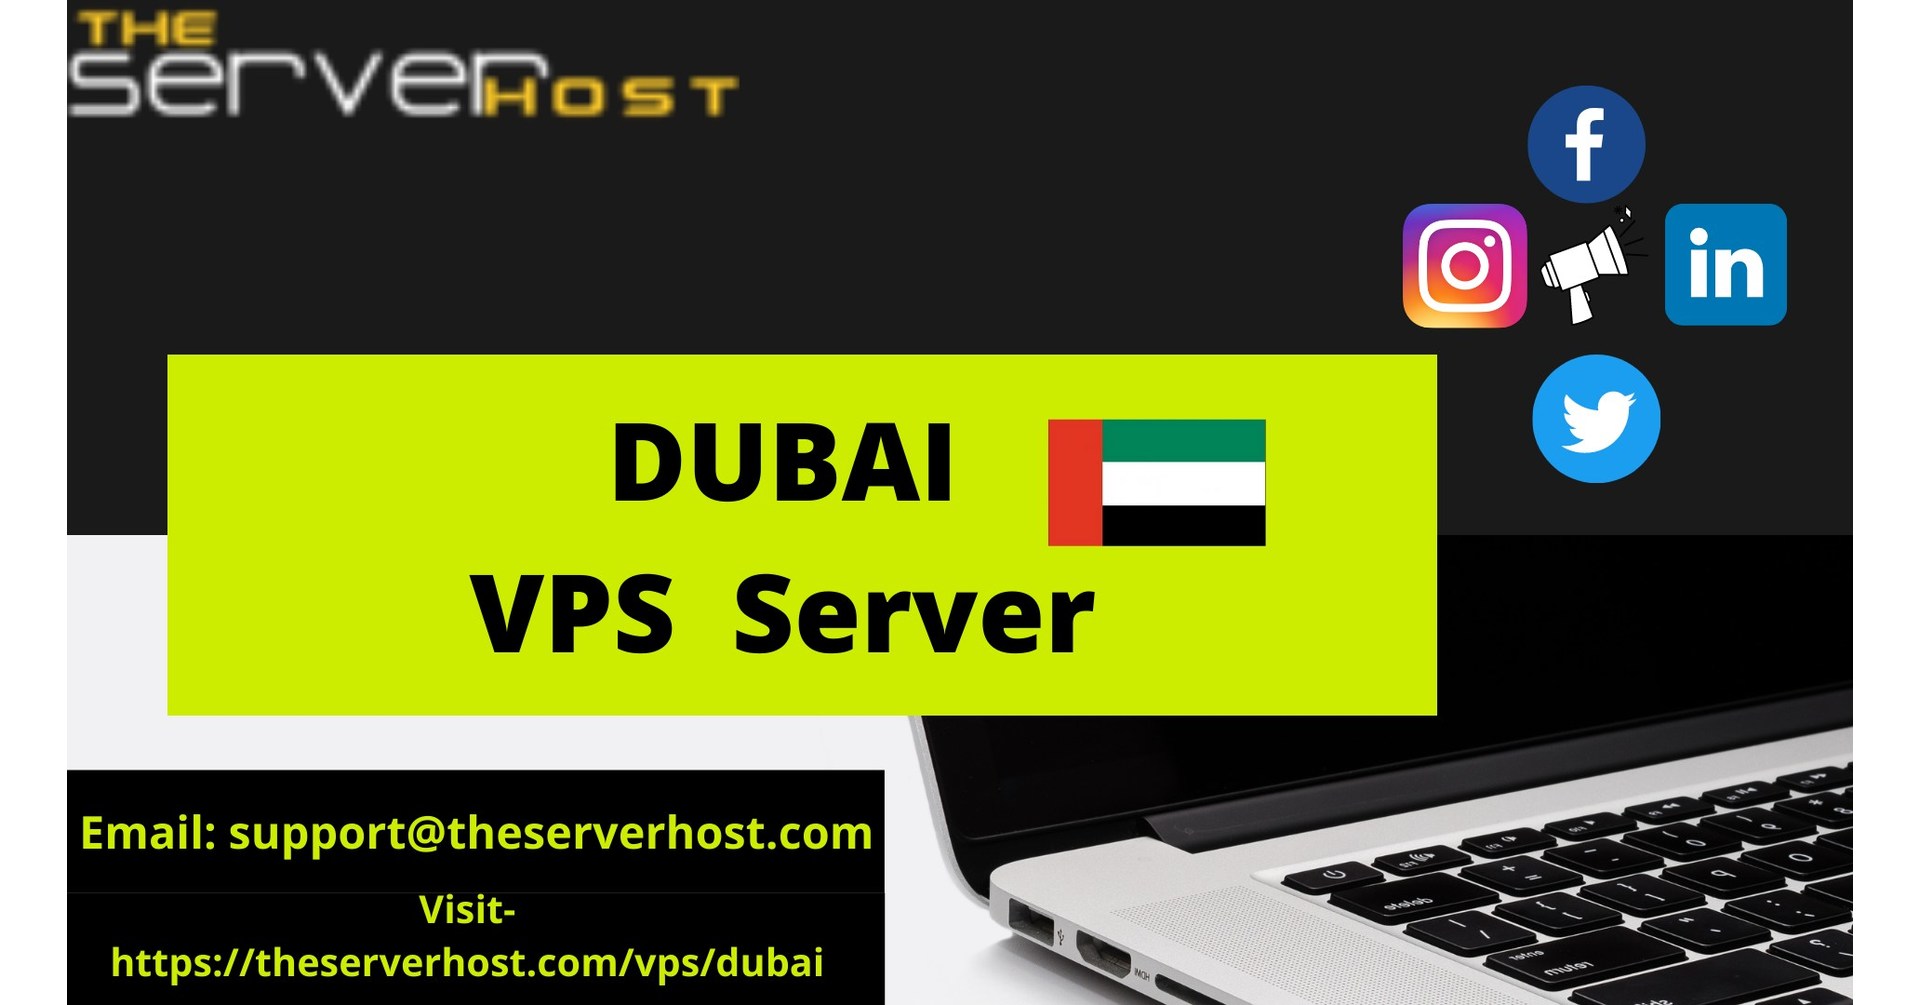 TheServerHost a VPS and Dedicated Server Provider Announcing New Budgeted and Enterprise Plans Now with More Resources and Power for Hosting in Dubai, UAE